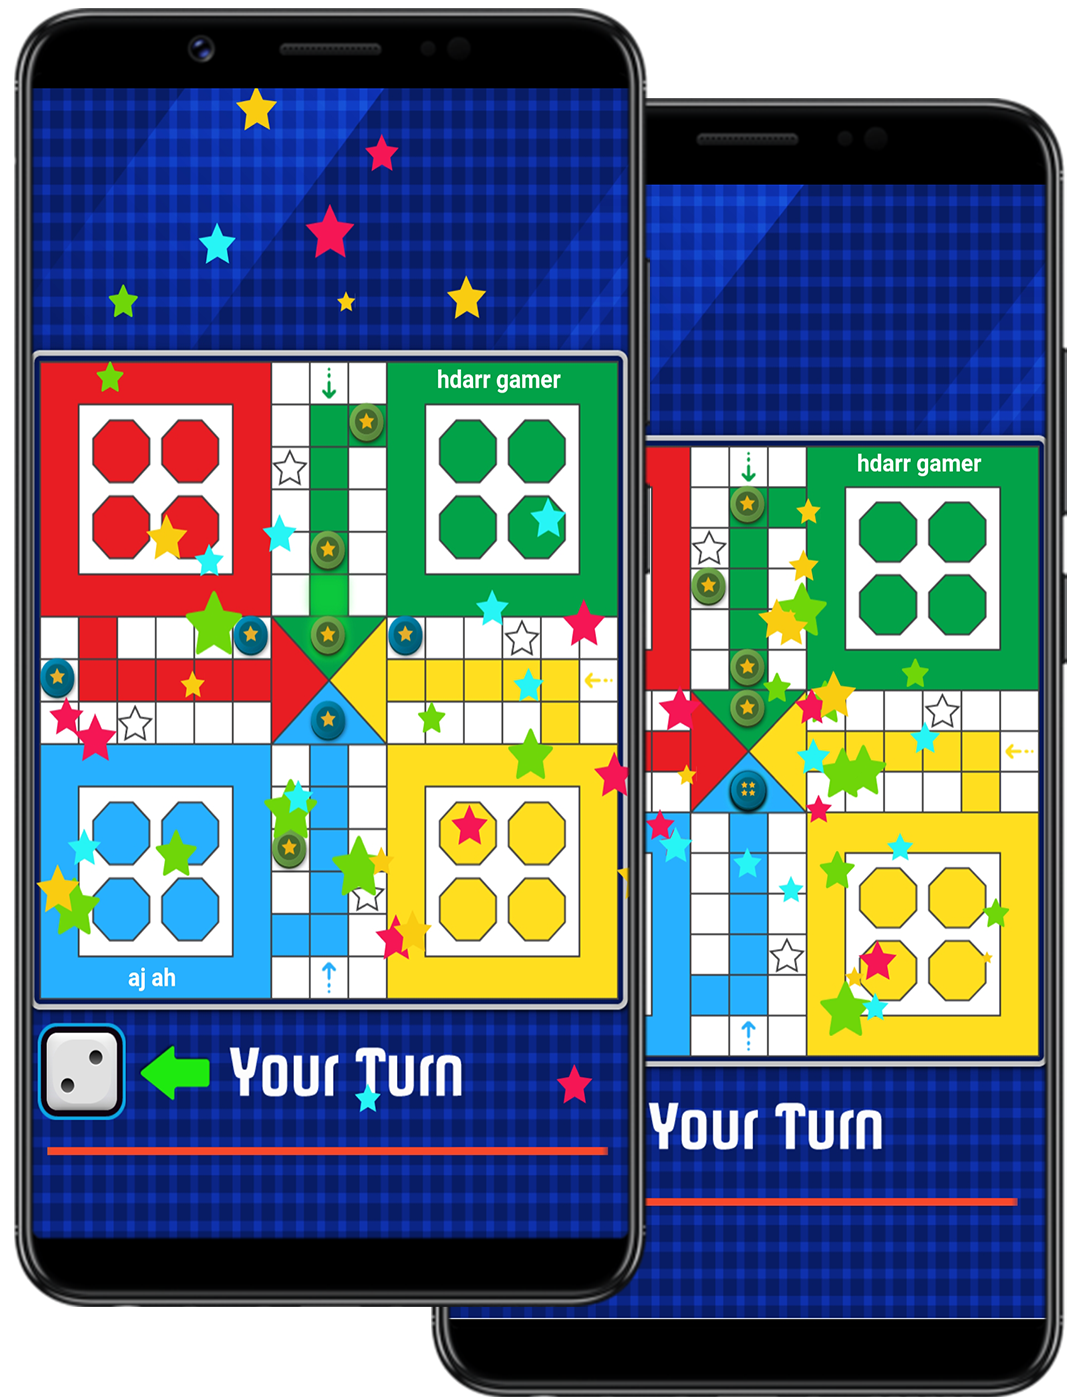 How to play LUDO King FREE Online Game? Rules of LUDO King : LUDO